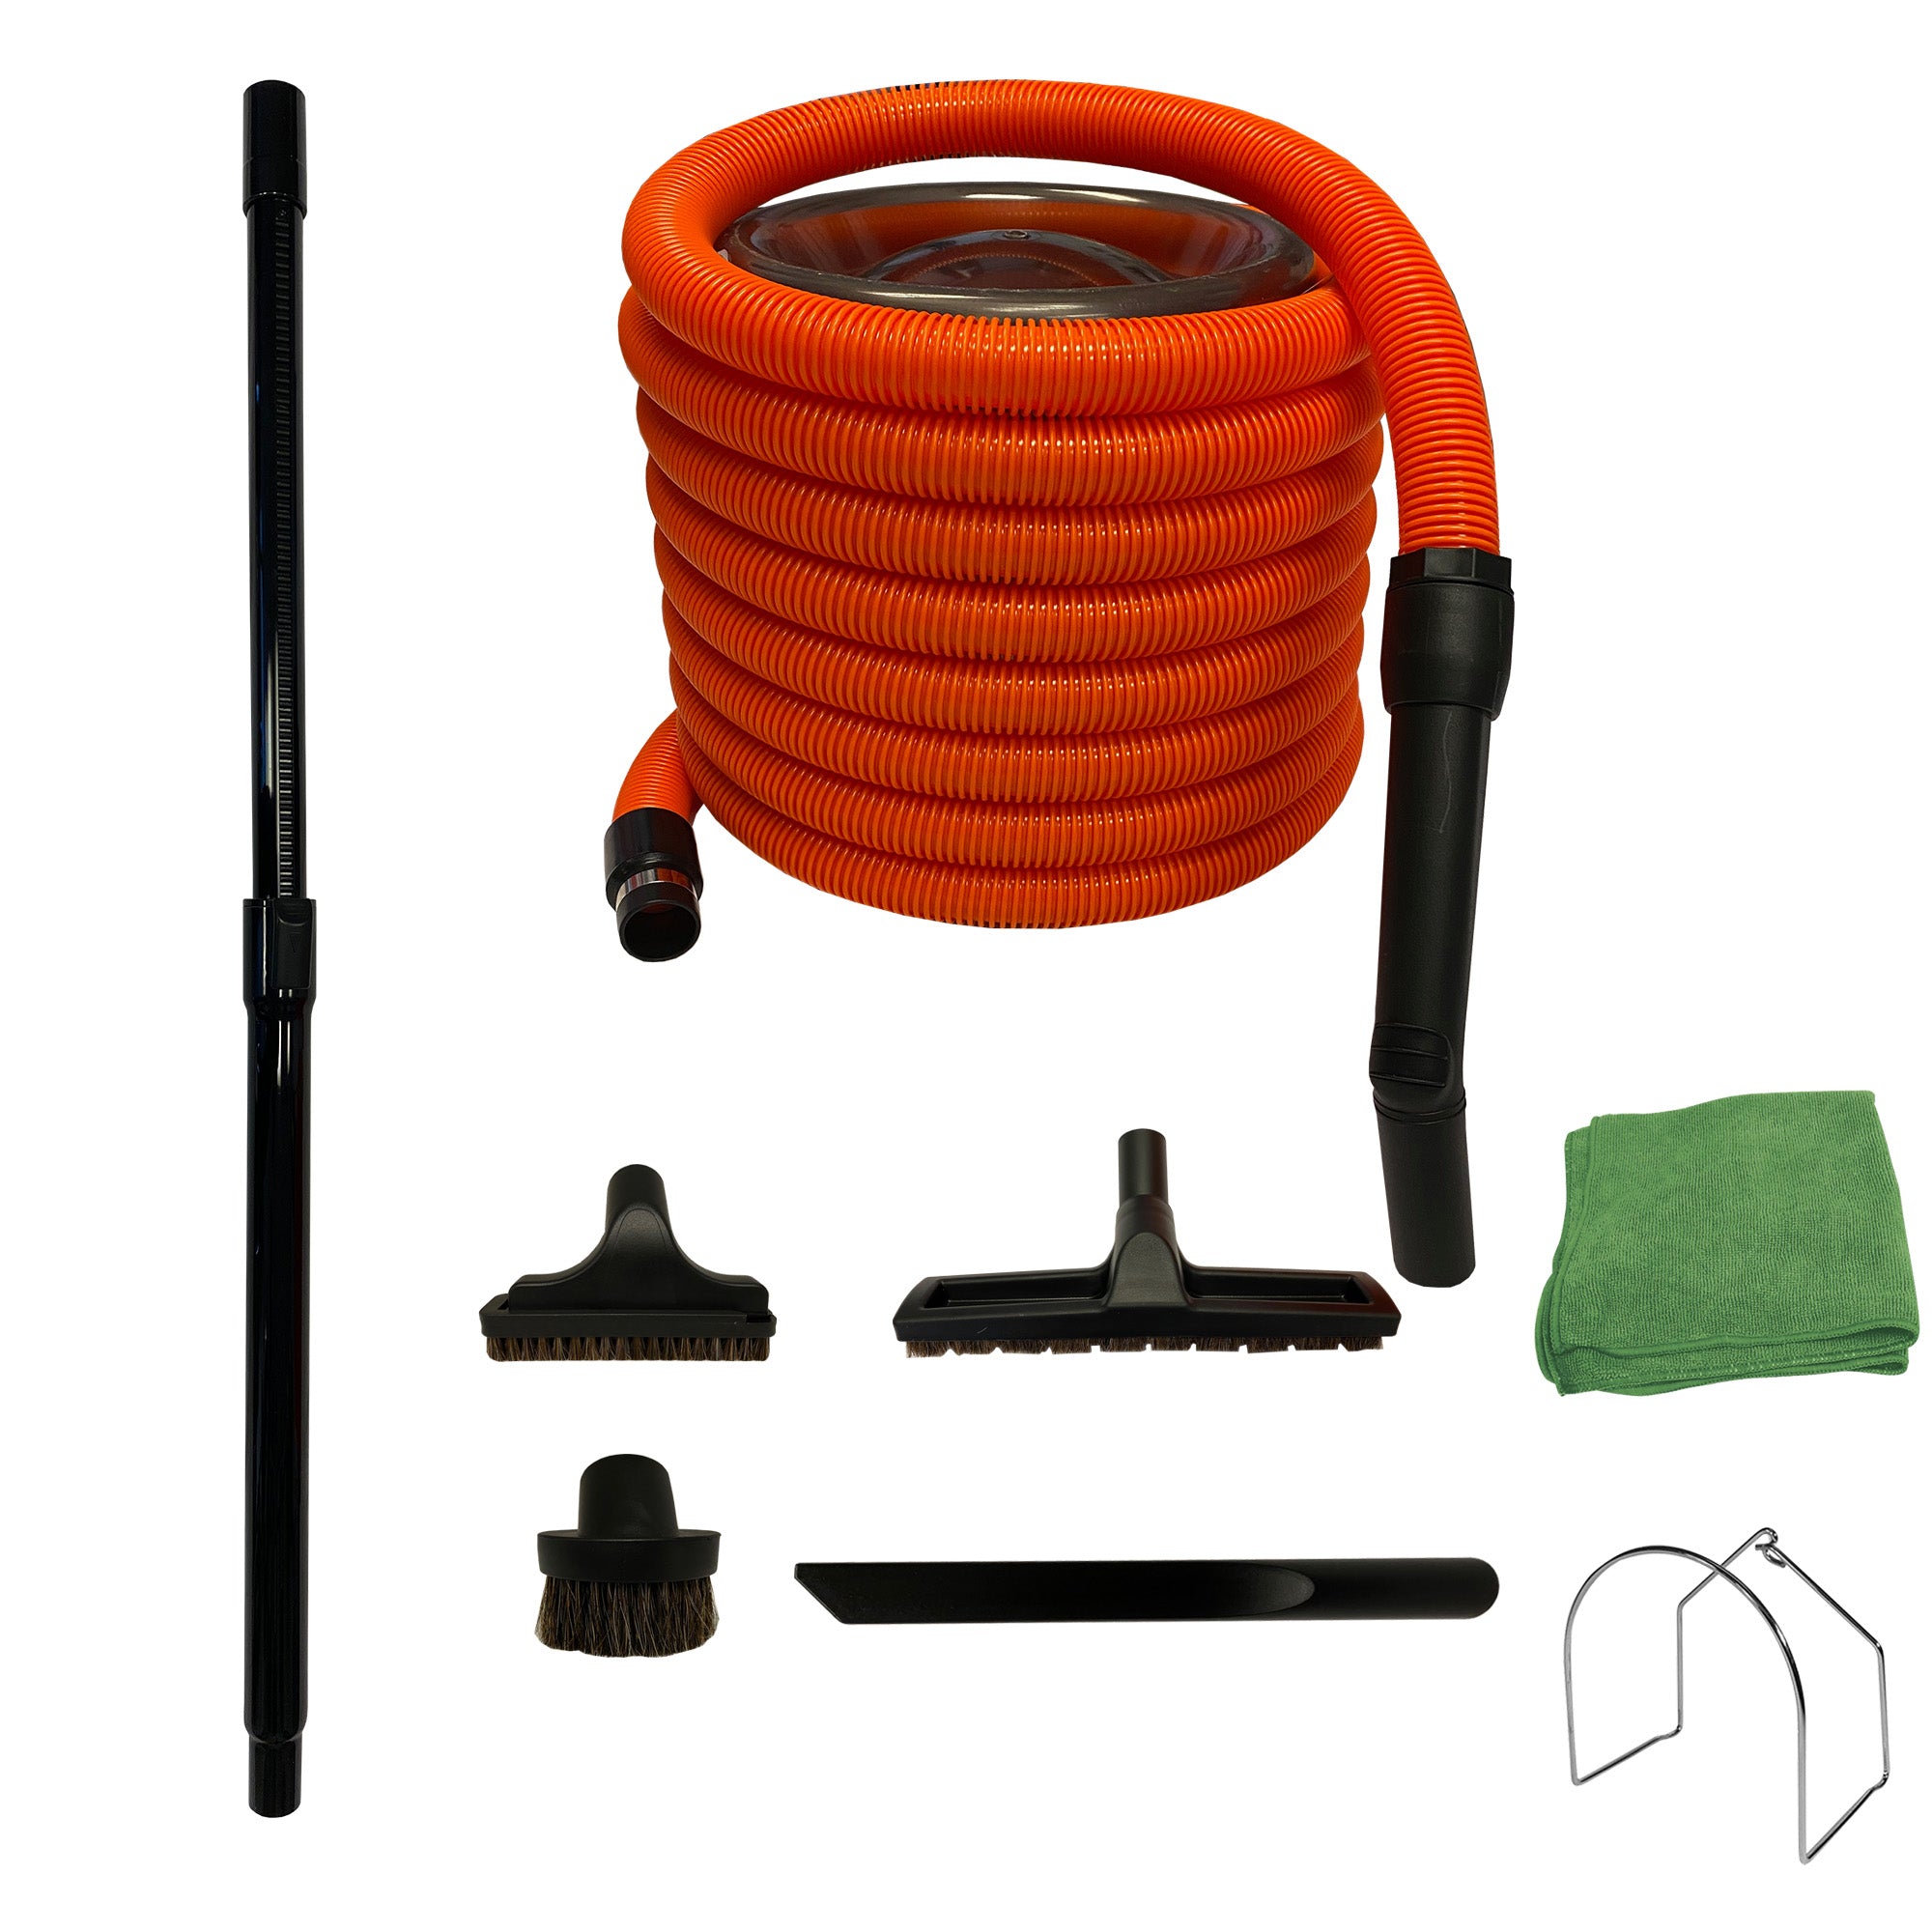 Central Vacuum Garage & Car Cleaning Kit with 1.25 Inch Commercial